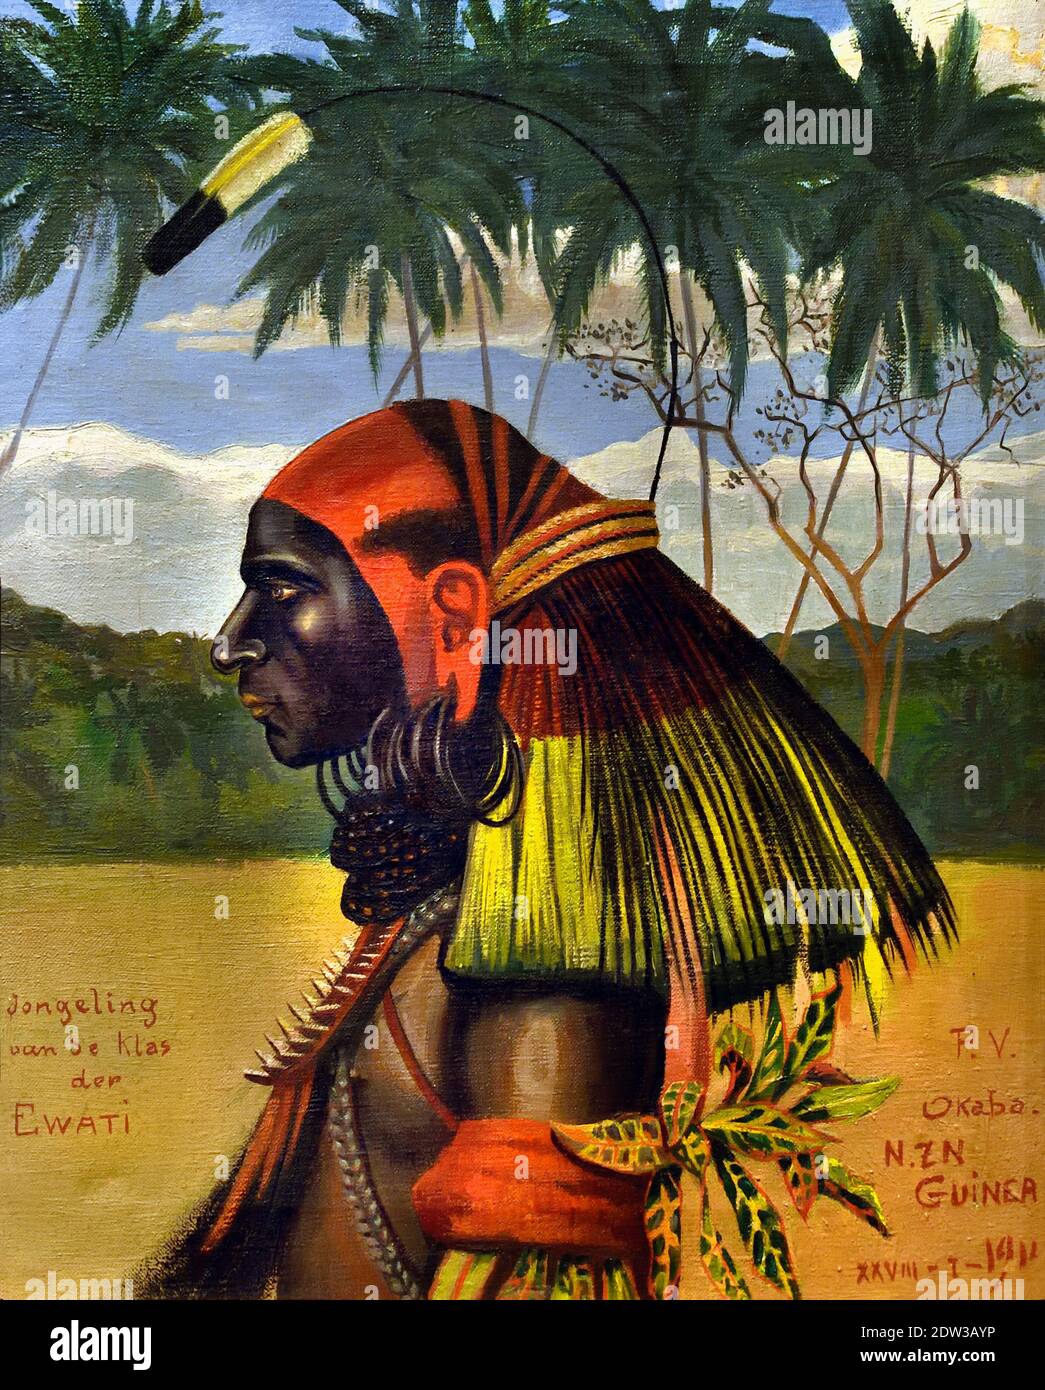 A Marind anim youth of the Ewati, class 1914 Okaba by Father Petrus Vertenten 1884 - 1946 Belgian Missionary of the Sacred Heart in Dutch New Guinea. Worked under the Marind-anim, a Papuan people in the wider area of Merauke that was notorious at the time for its headhunting and its bizarre, sexually-oriented fertility rituals. Stock Photo